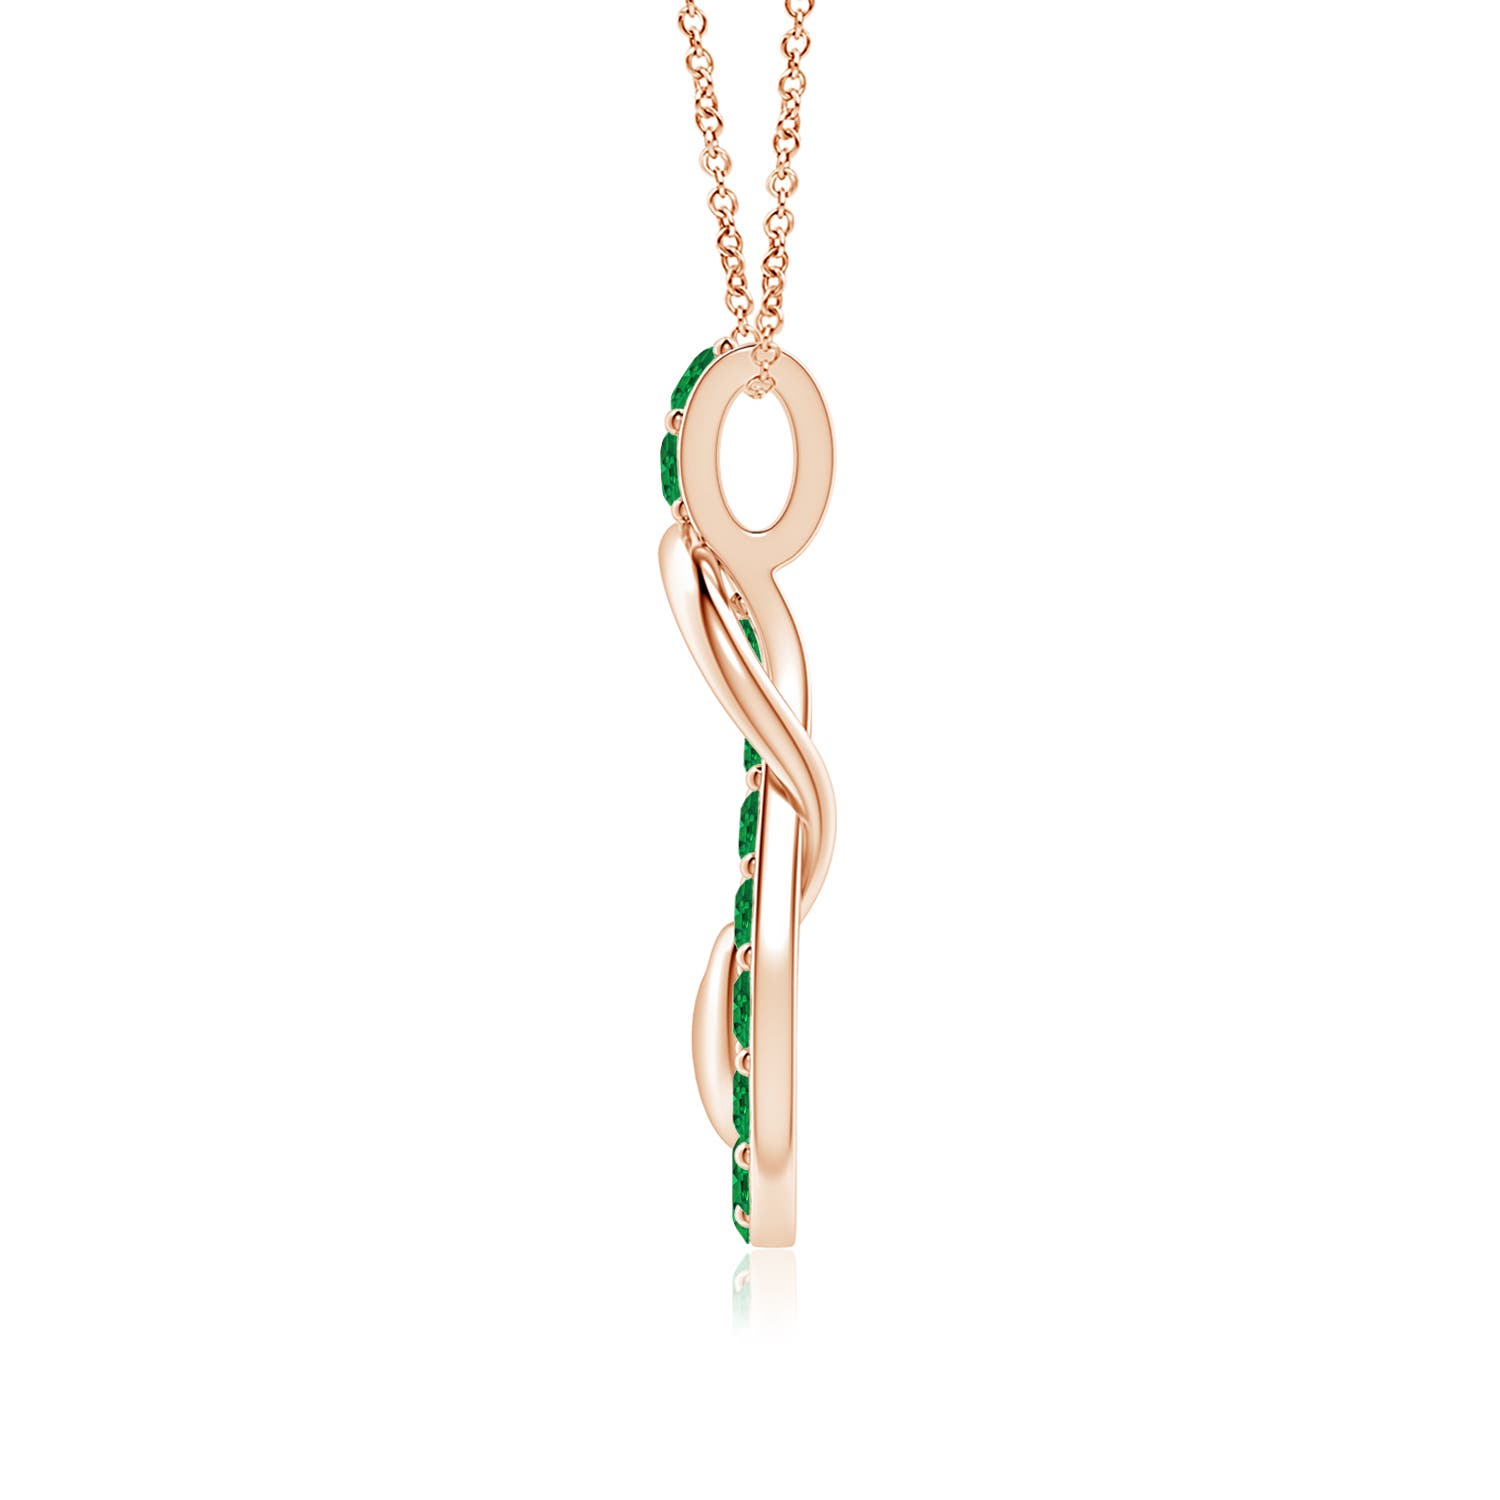 AAA - Emerald / 1.9 CT / 14 KT Rose Gold